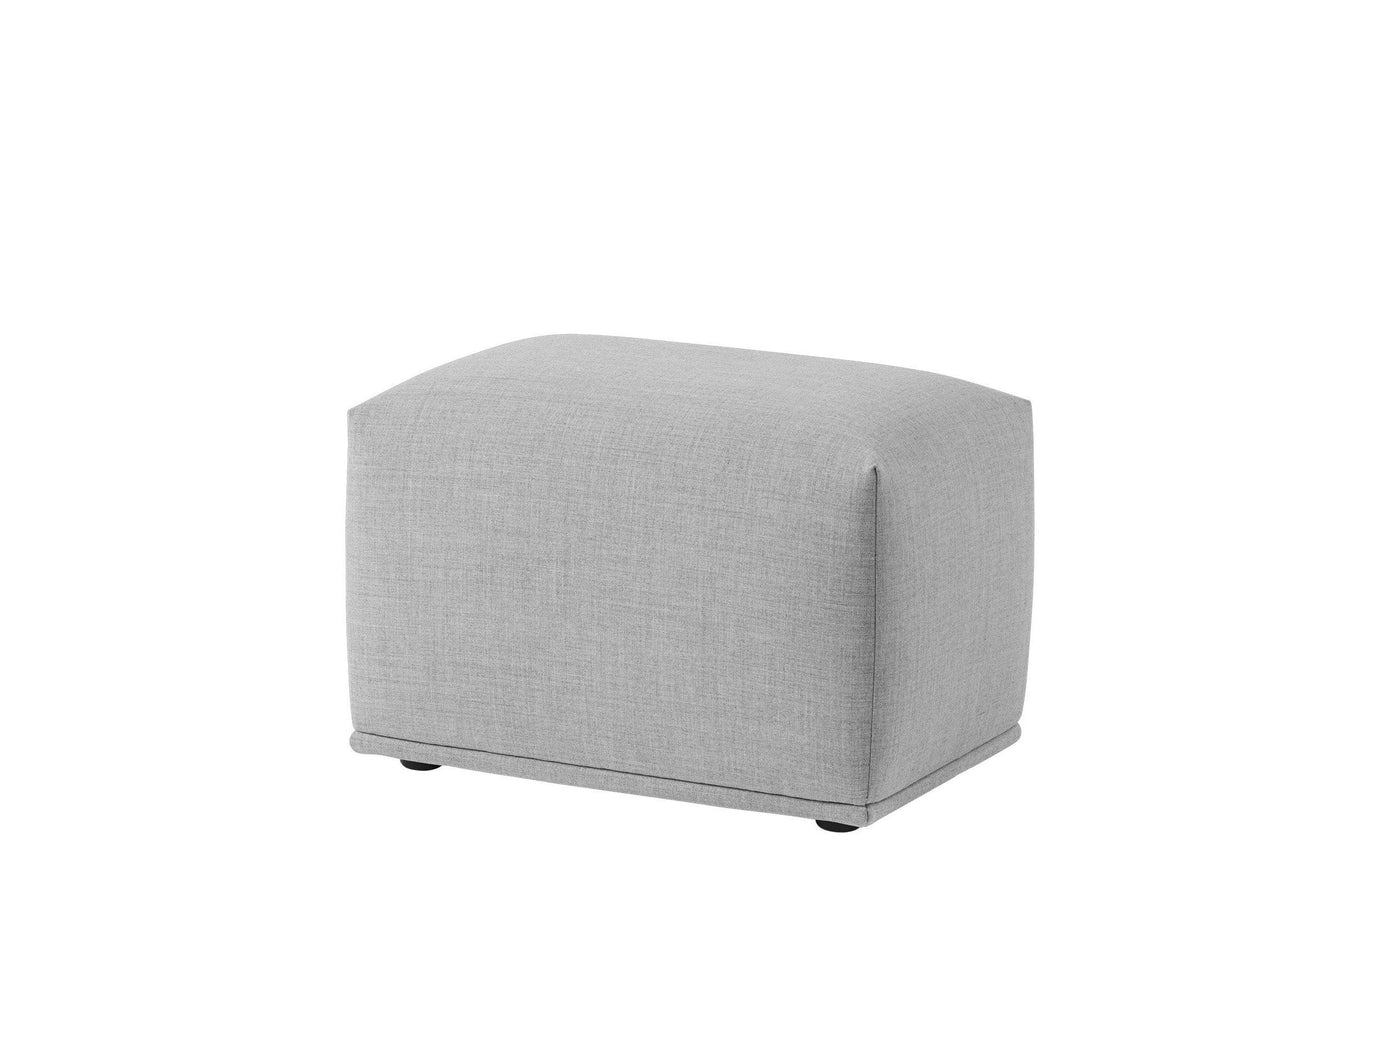 Muuto Echo Pouf W62 x D42cm in Remix 123 made to order Kvadrat fabric. made to order from someday designs.  #colour_remix-123